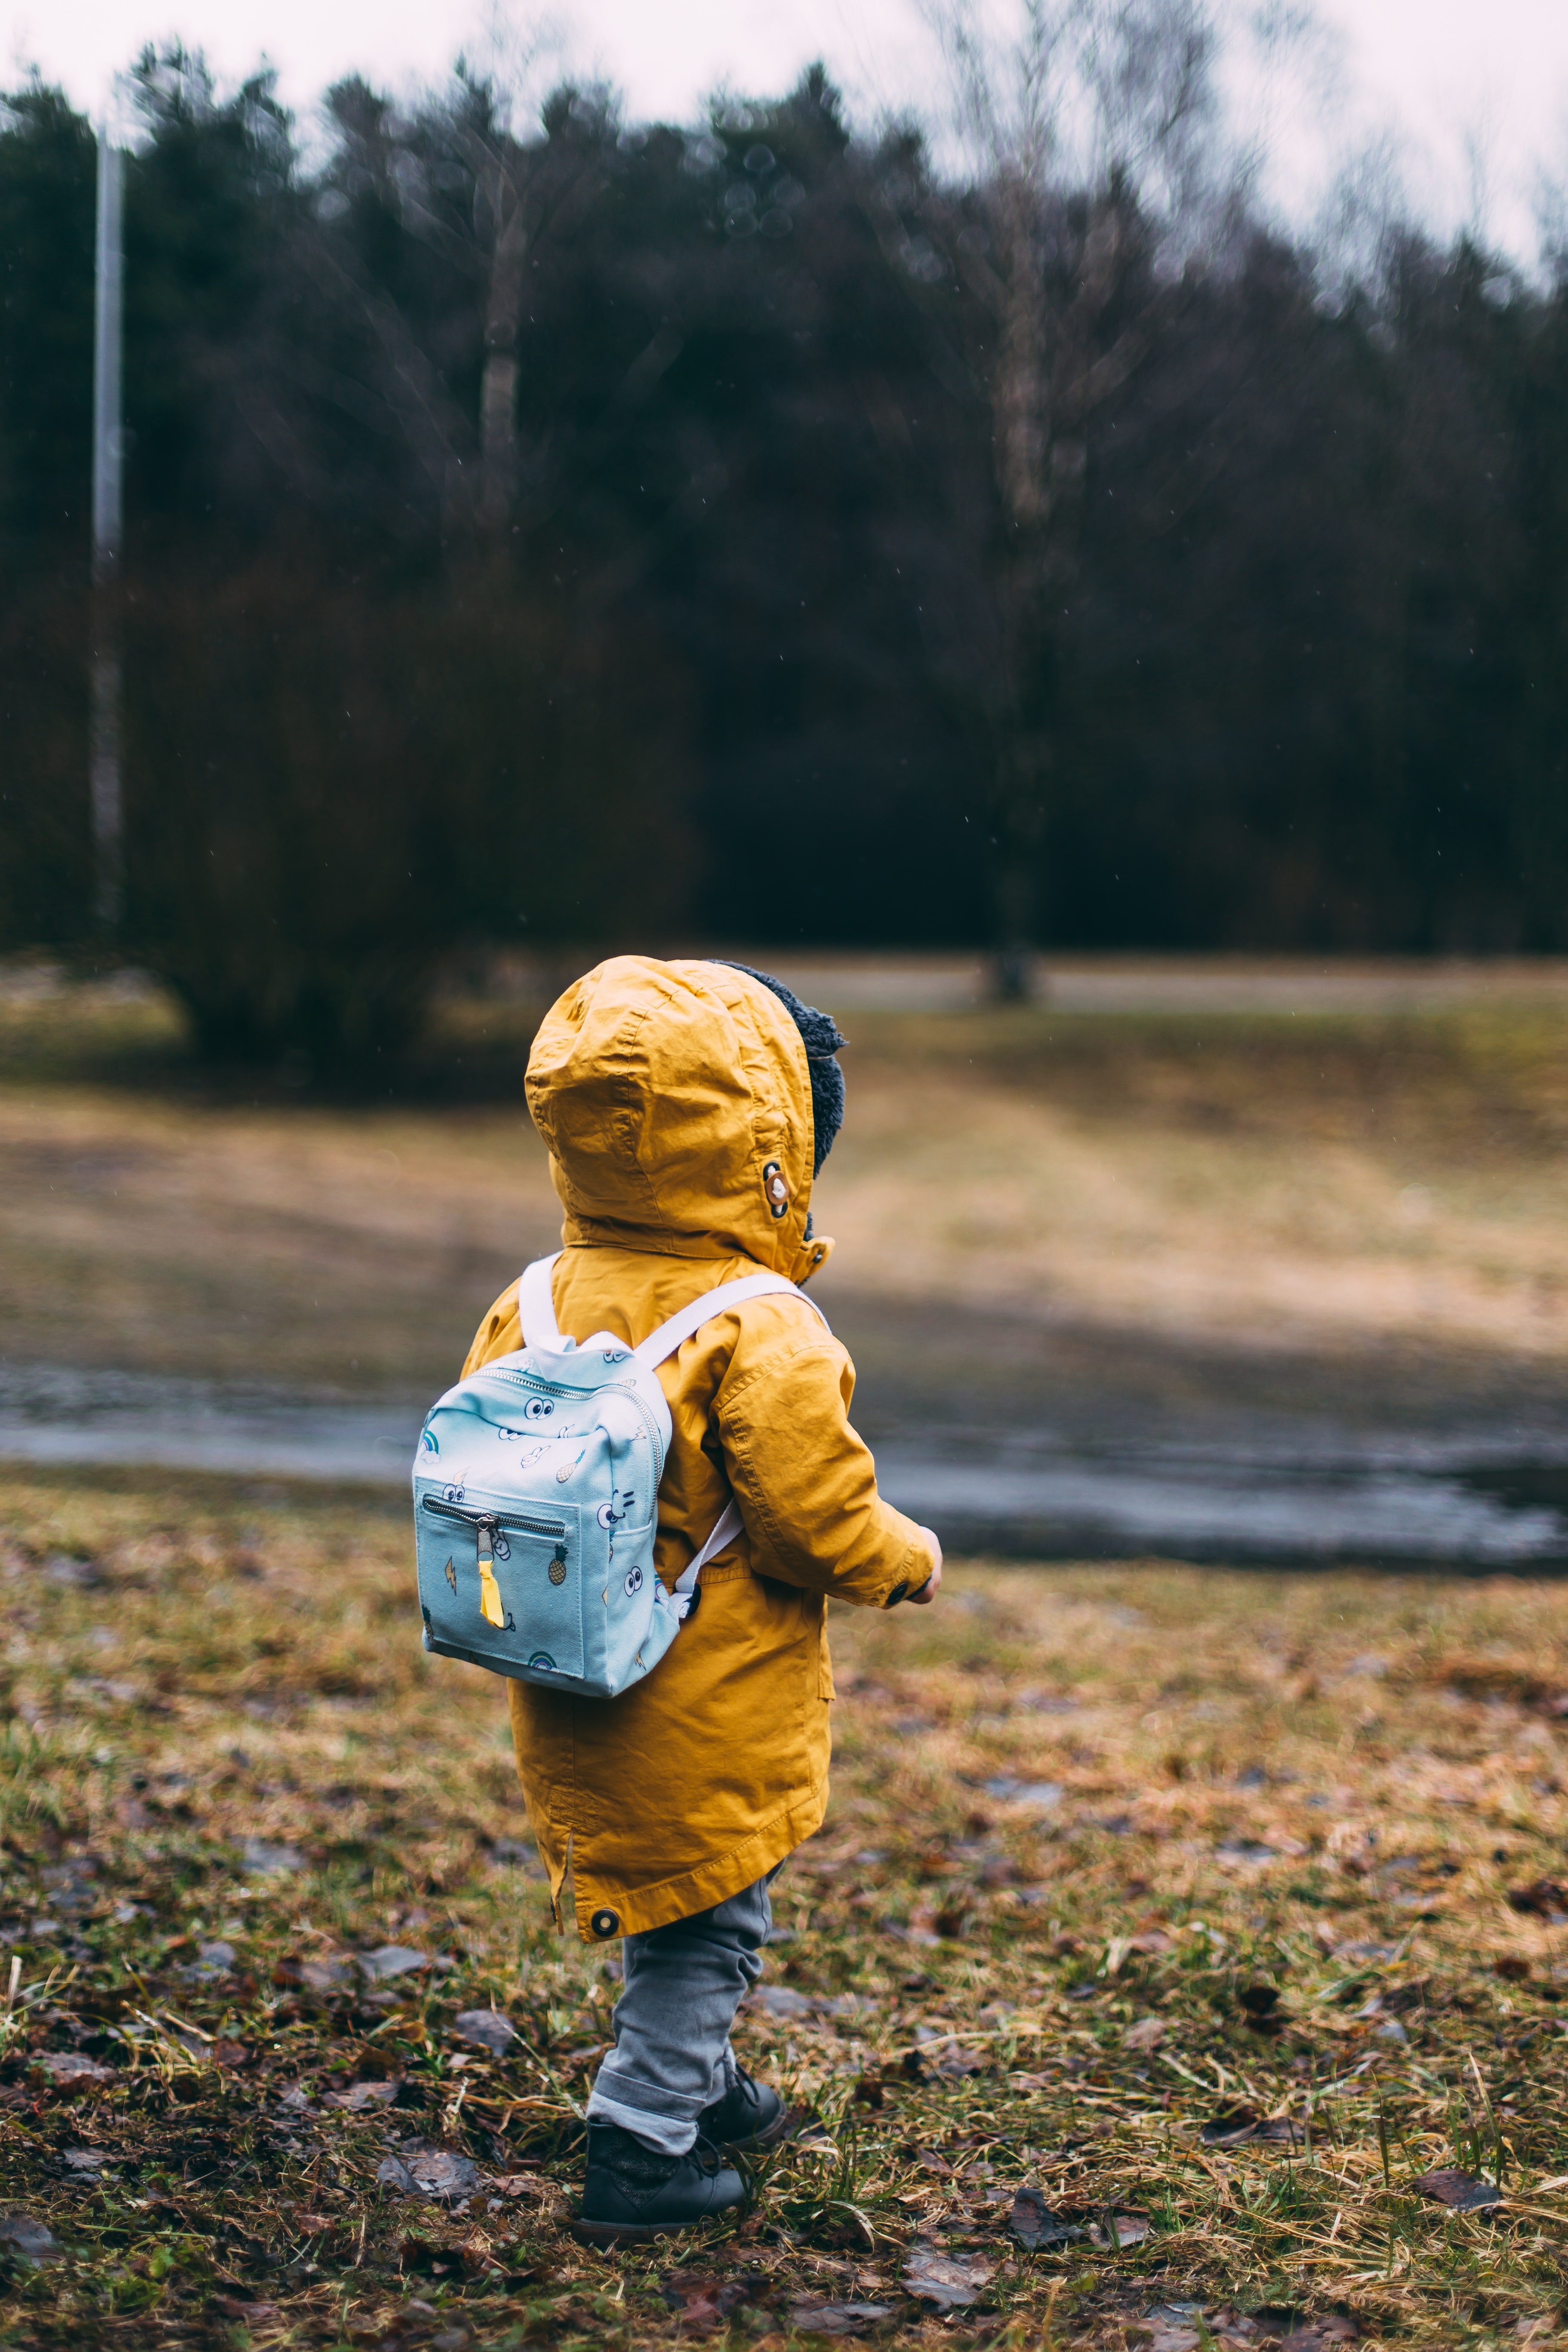 Scott was taken aback when he saw that little boy stuffing trash into his backpack. | Source: Unsplash